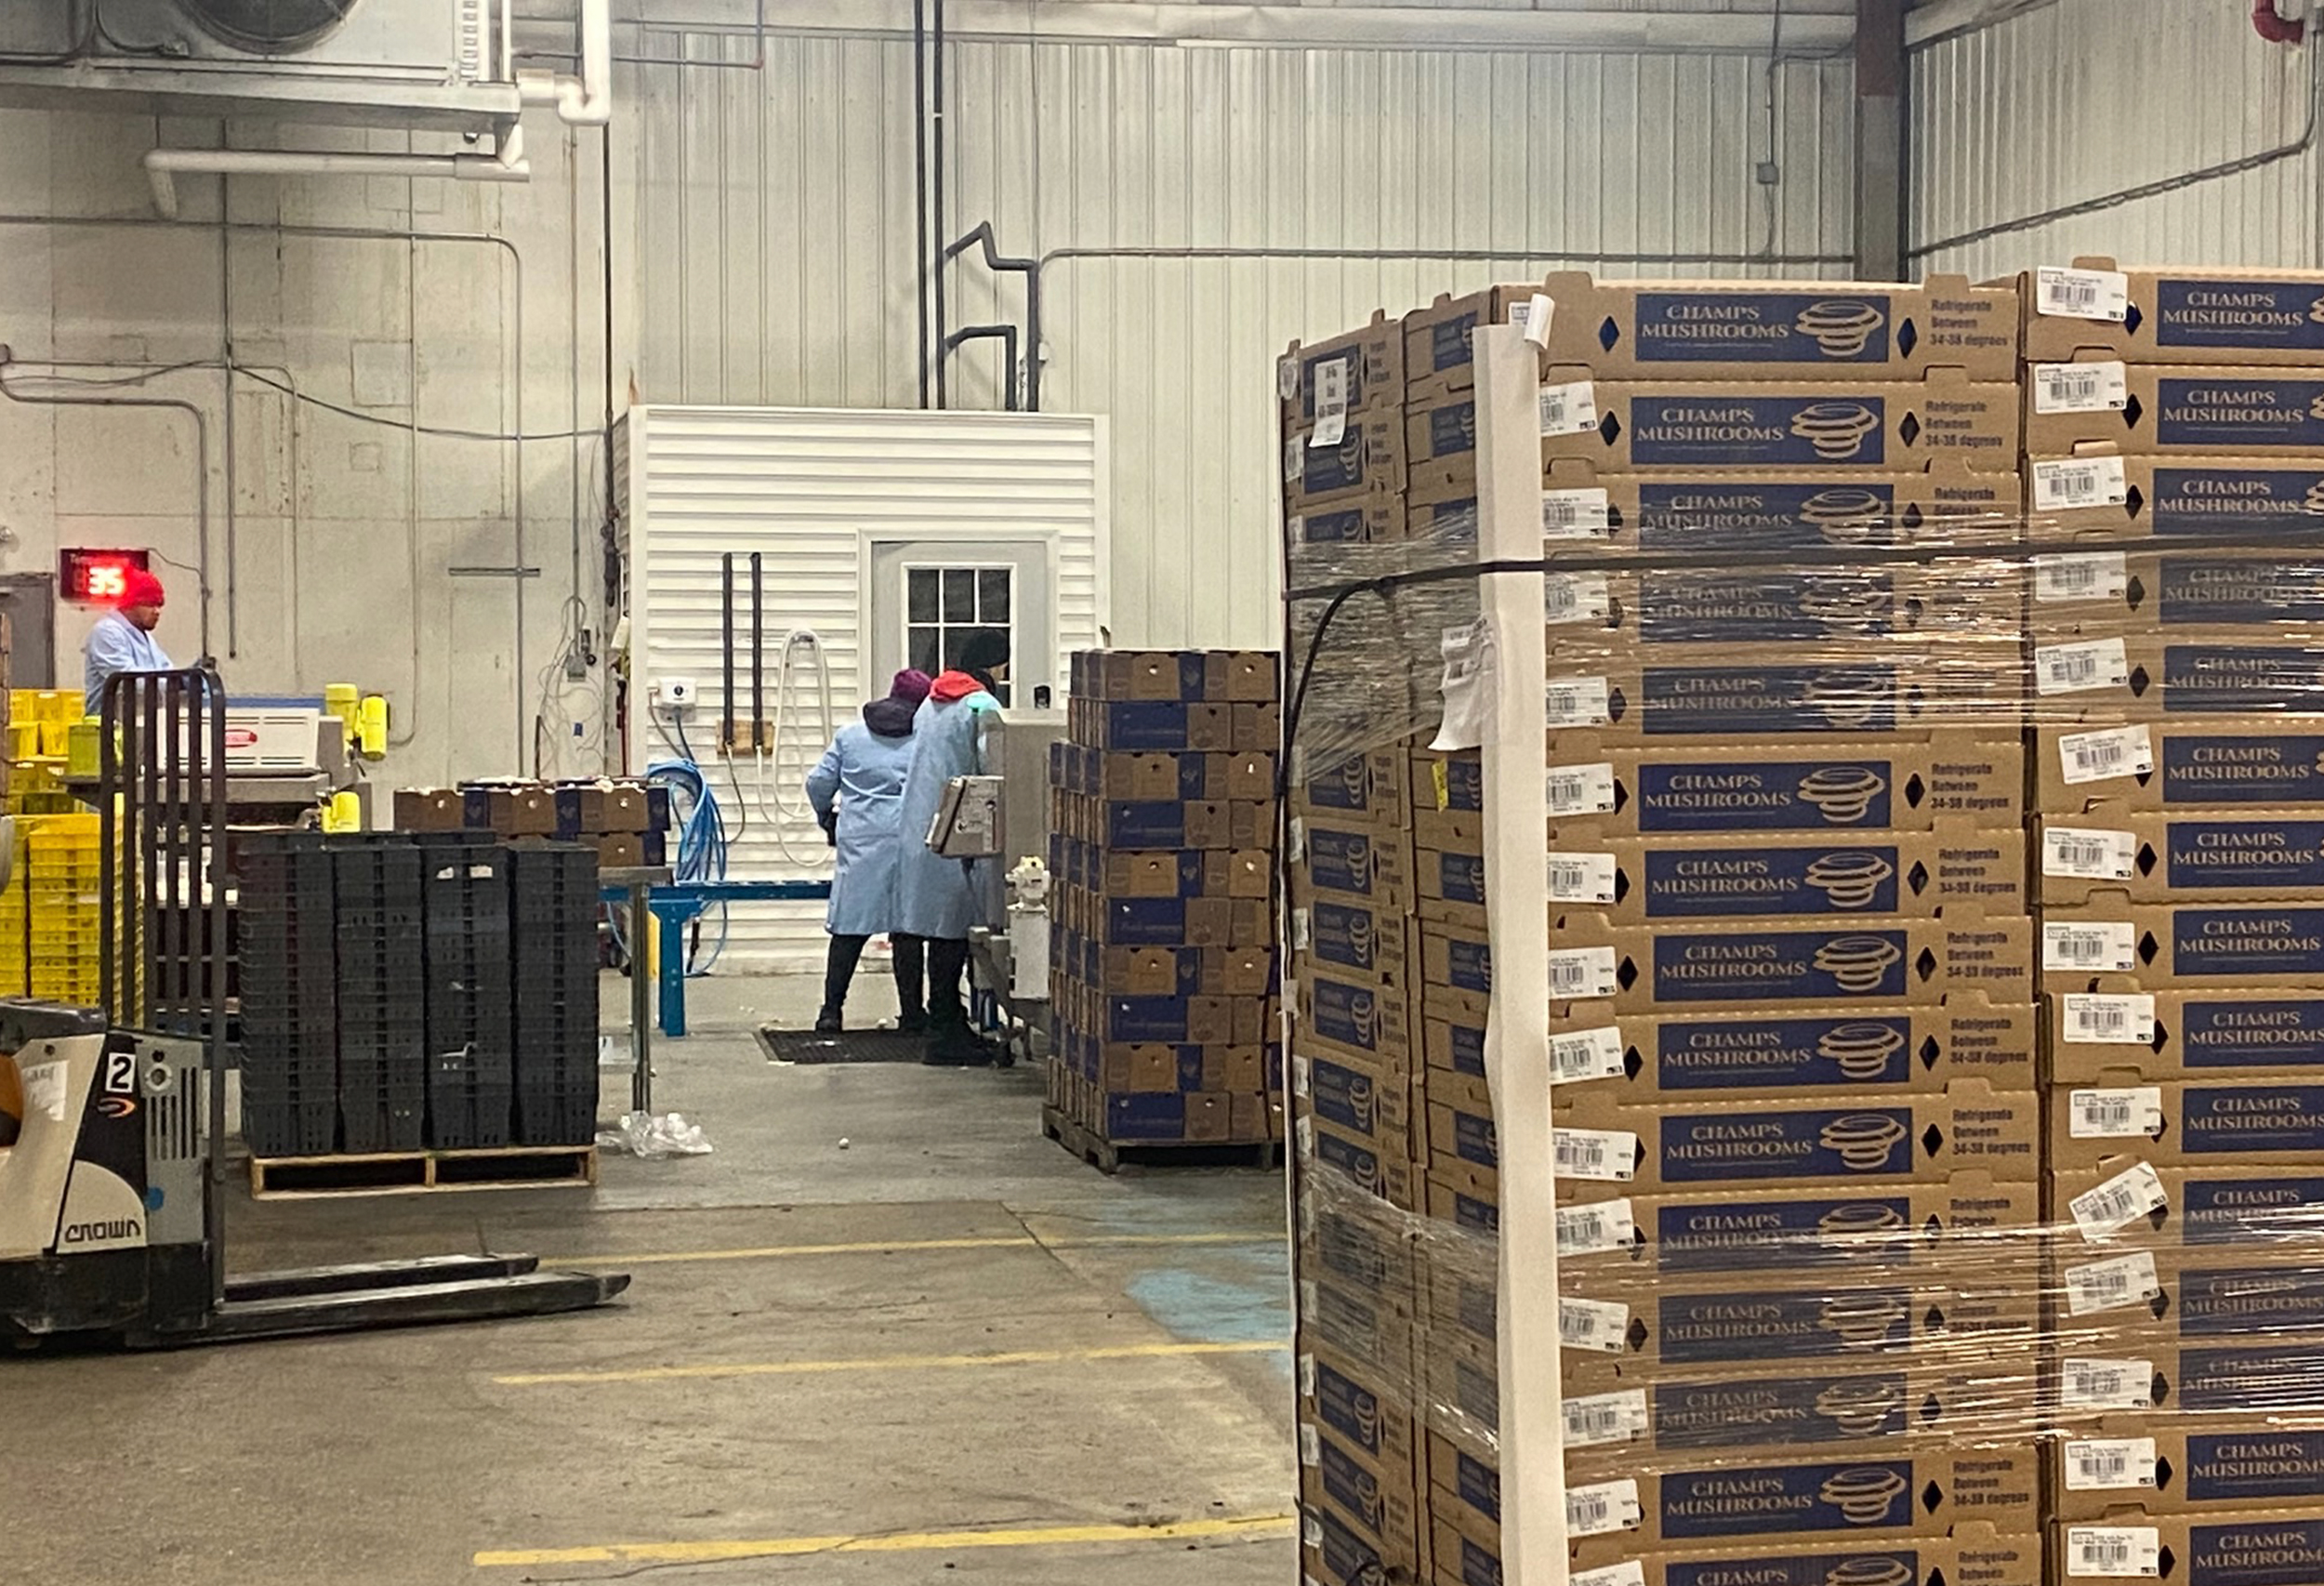 Workers moving boxes at the South Mill Indianapolis distribution center